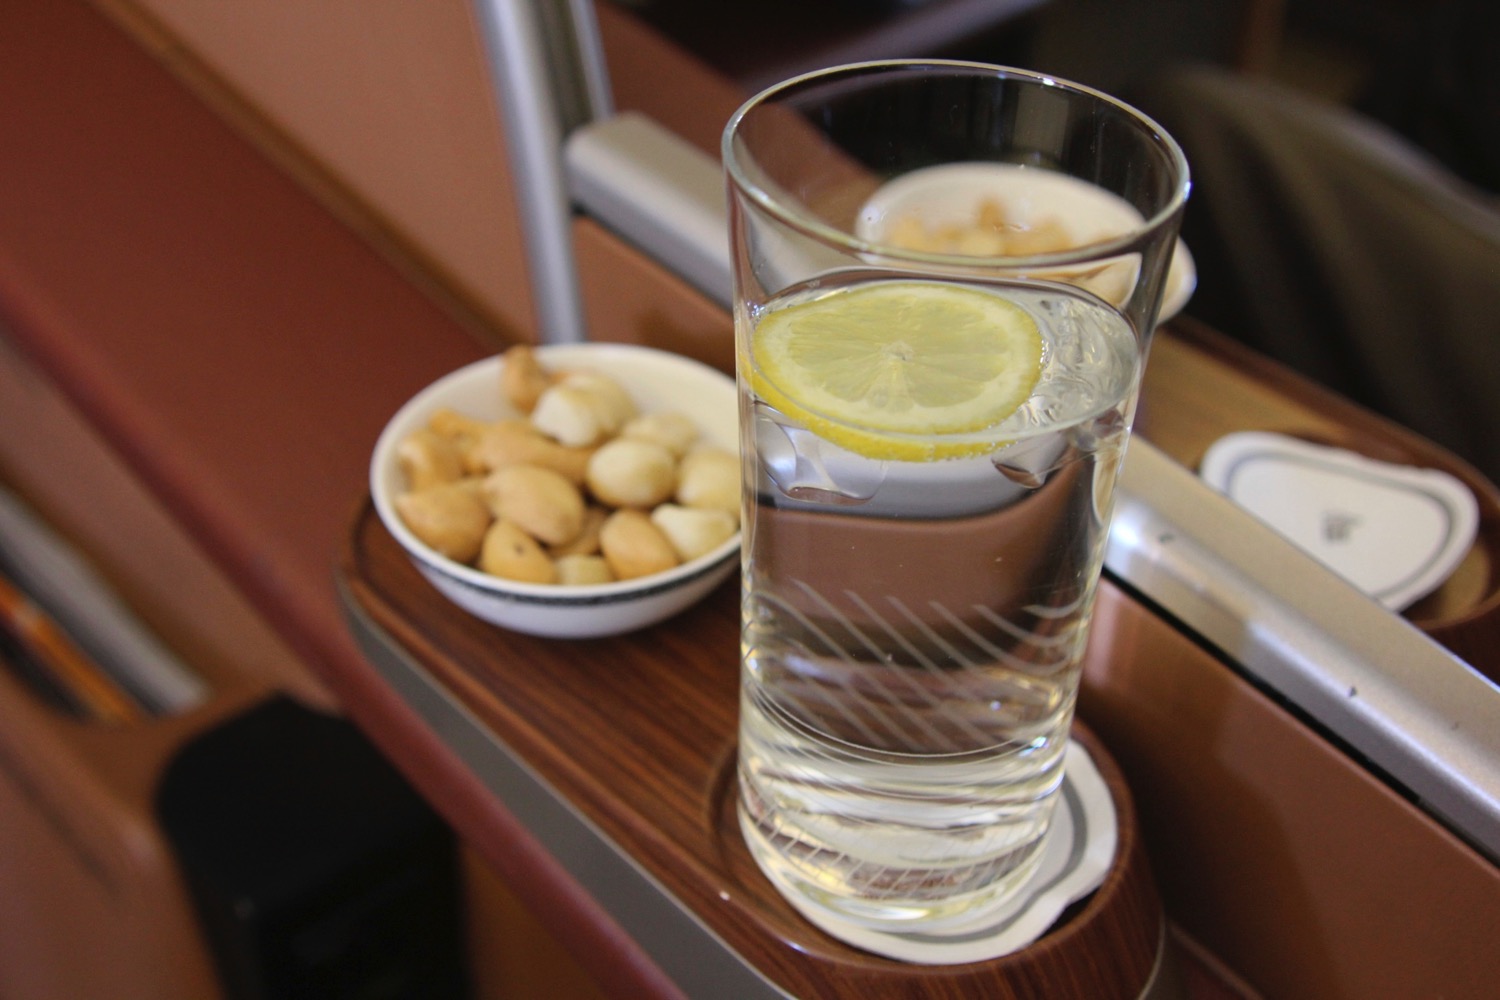 a glass of water with a lemon slice and a bowl of nuts